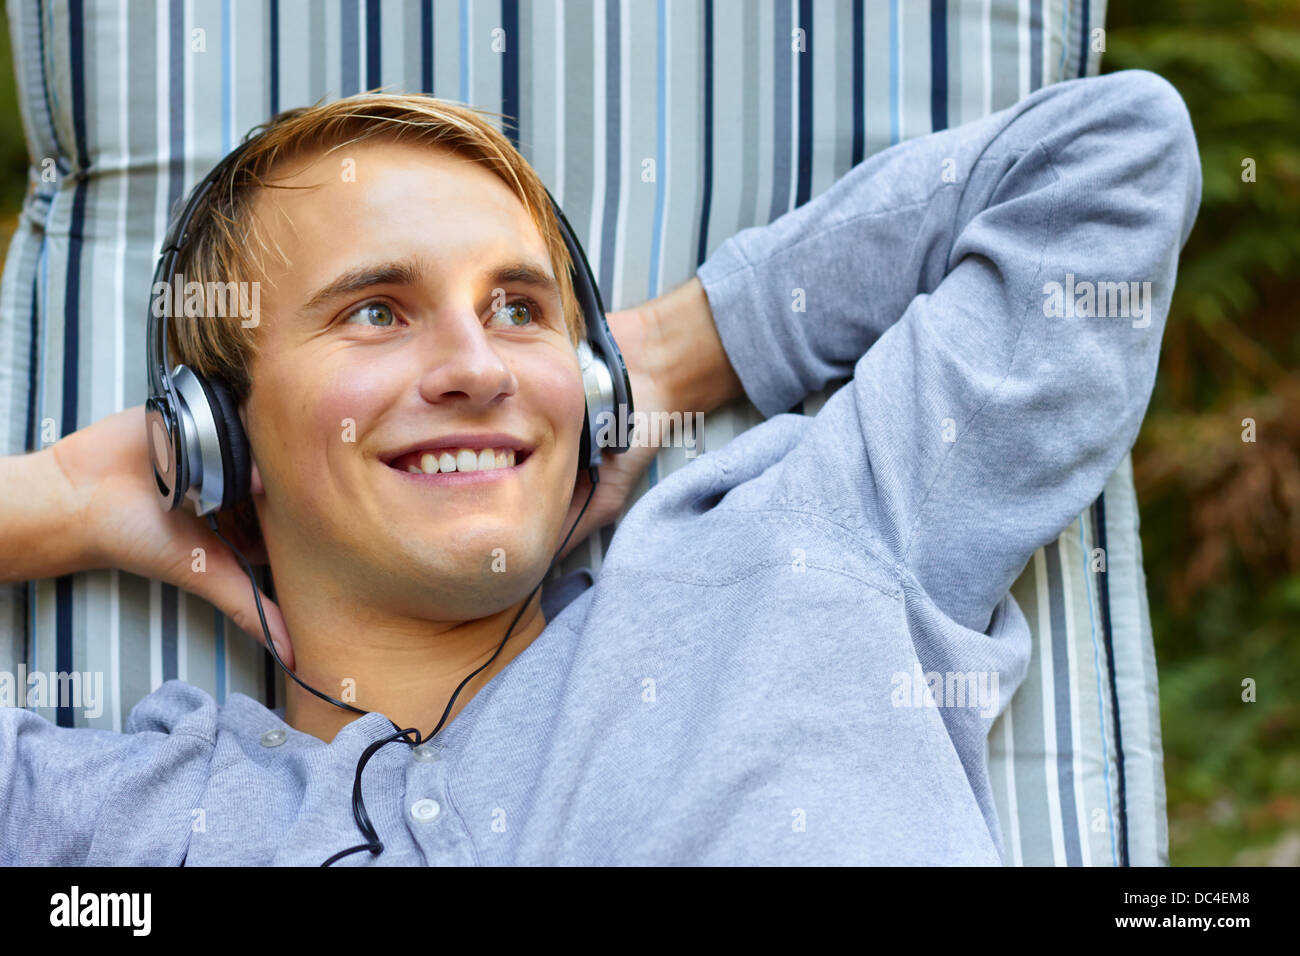 Young good looking male relaxing and listening to music with headphones. Stock Photo